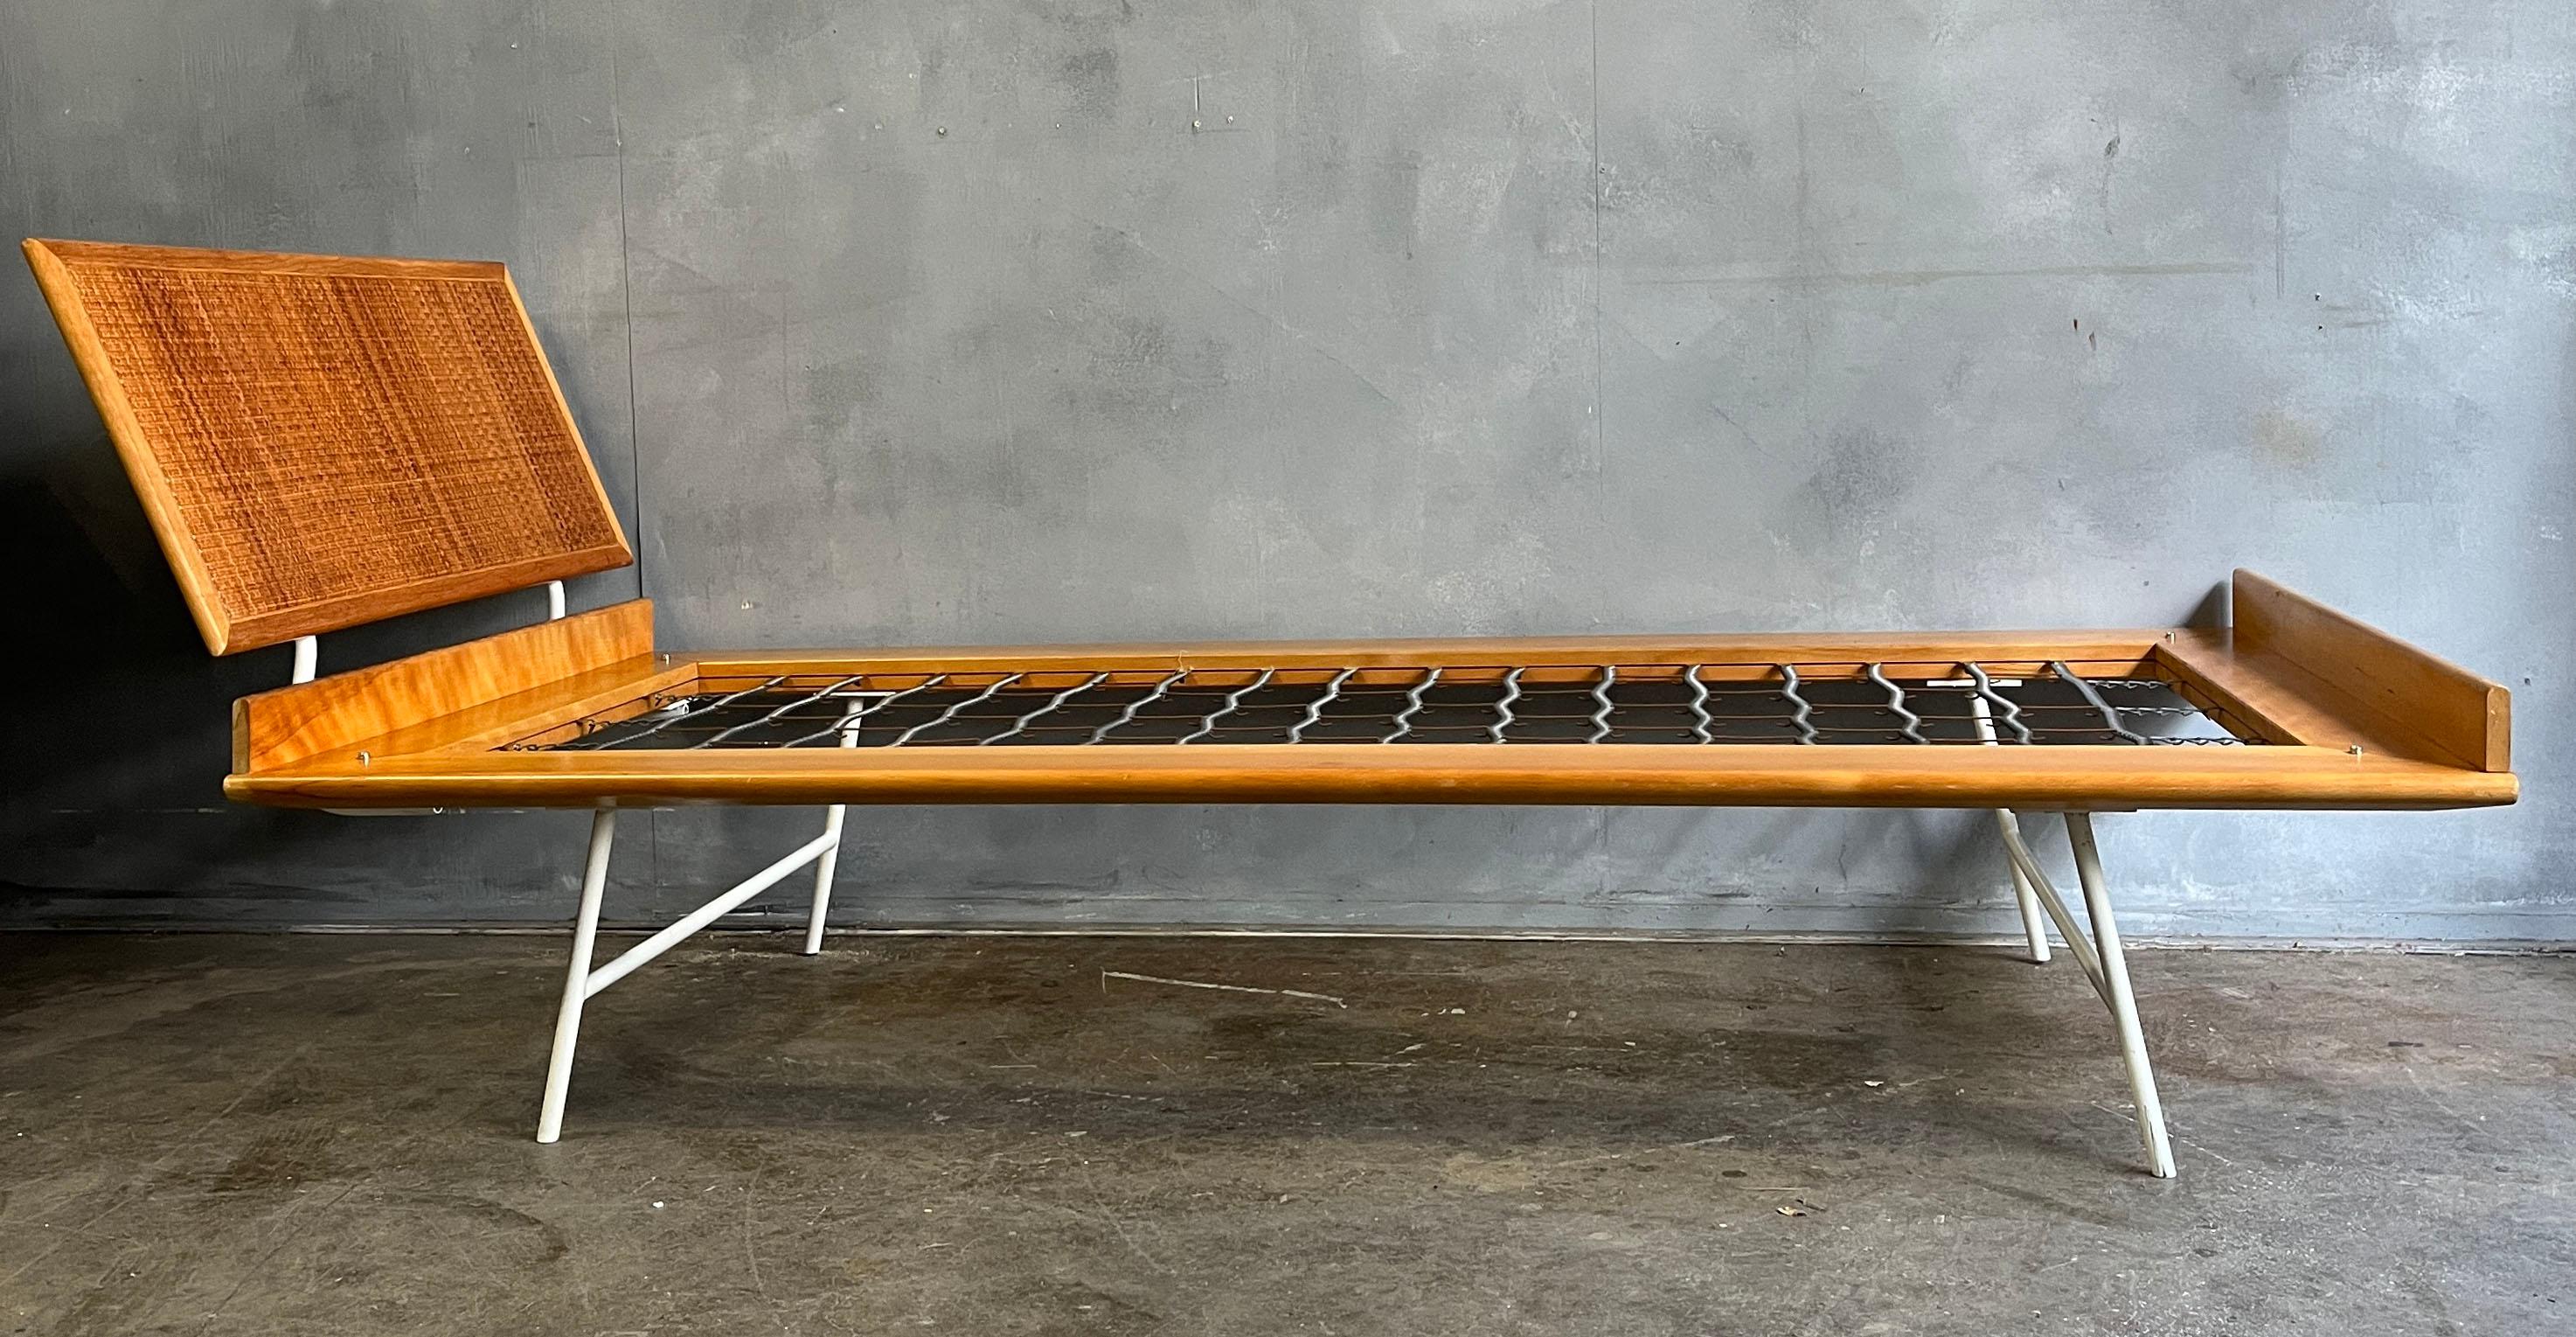 Mid-Century Modern Midcentury Thin Edge Bed by George Nelson for Herman Miller 1950's